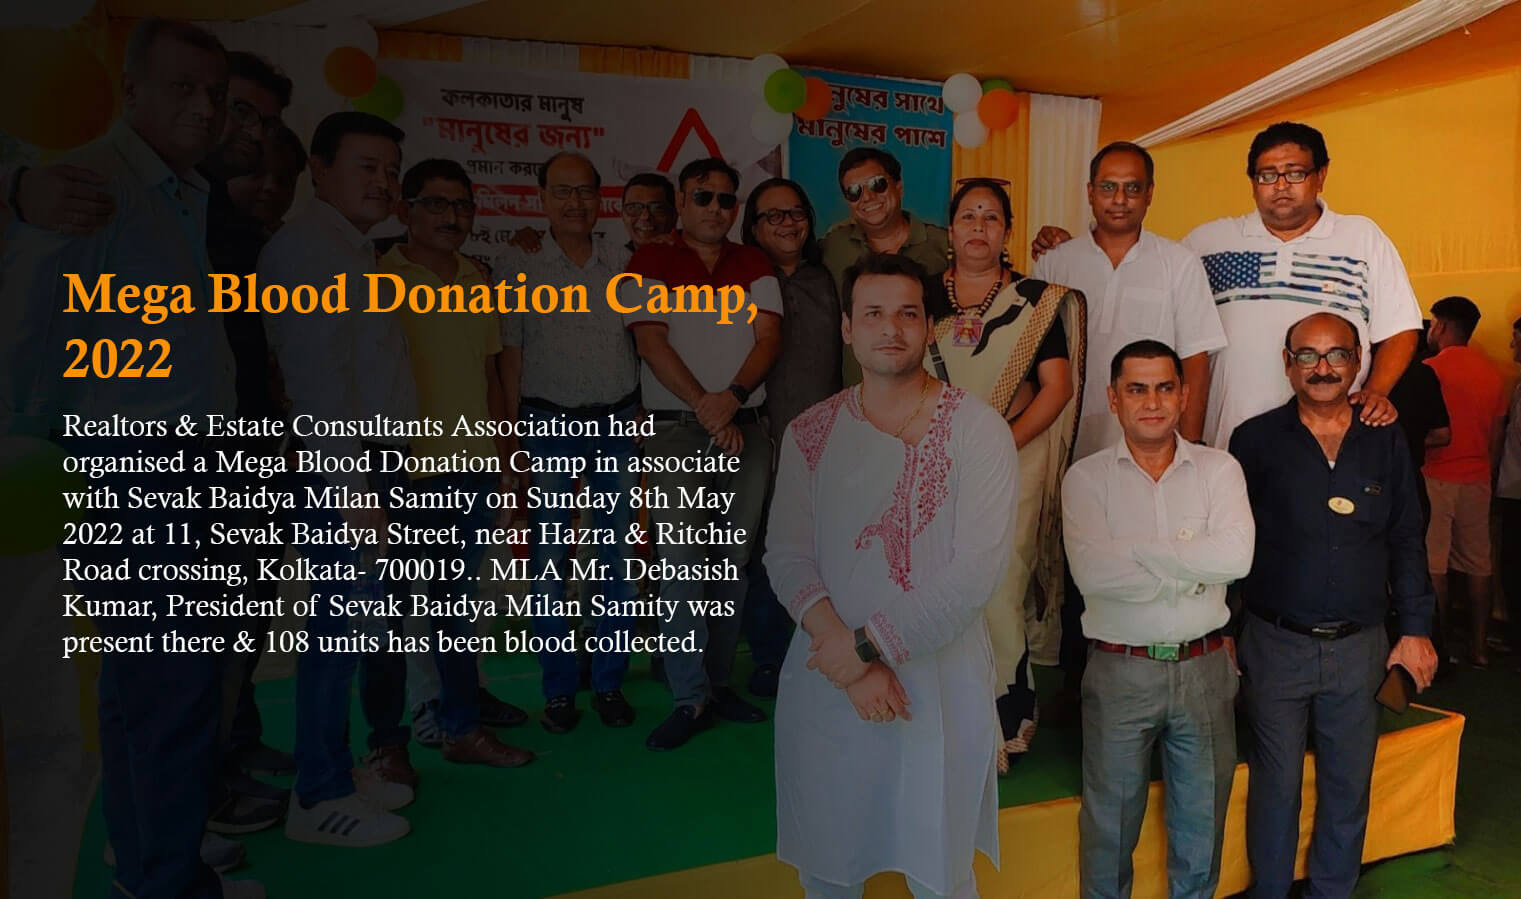 Blood donation camp in 2022